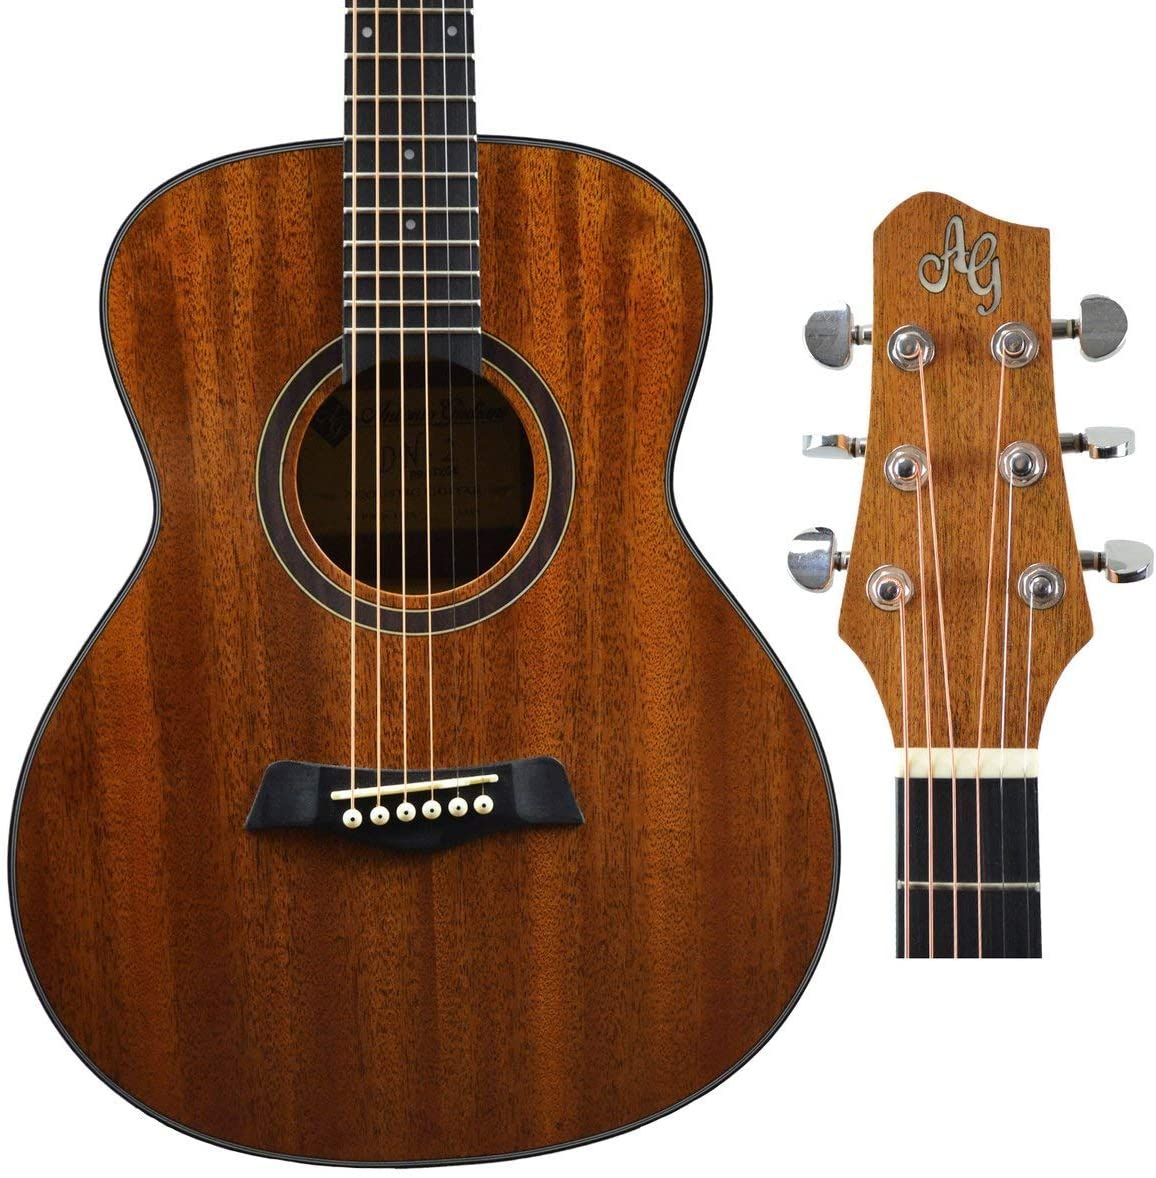 Antonio Giuliani Acoustic Mahogany Guitar front view and tuners